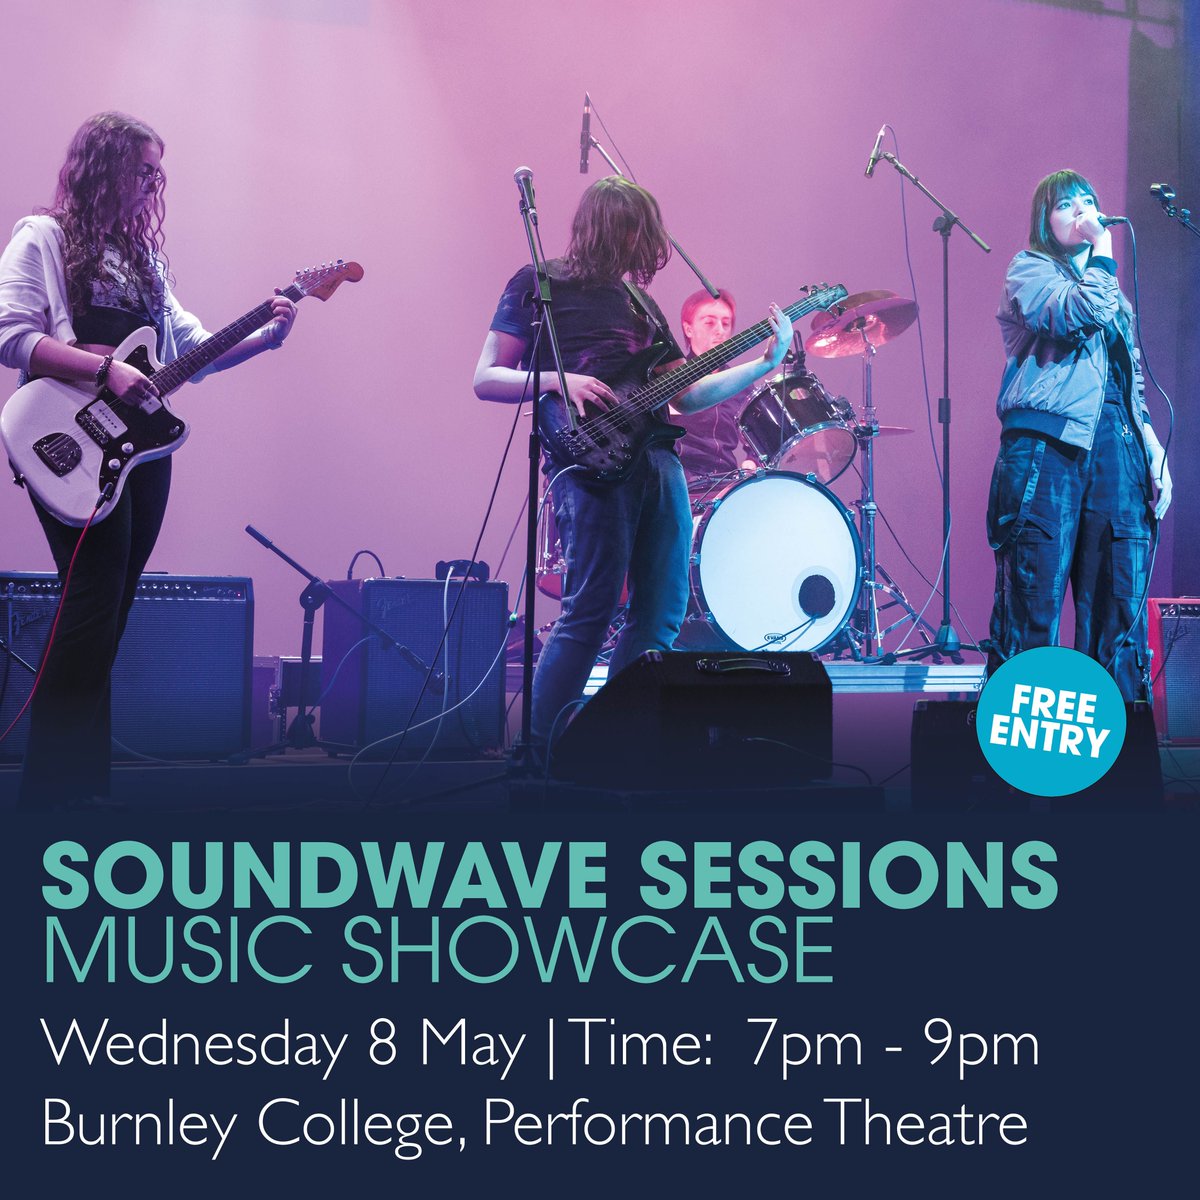 Level 3 Year 1 Music Students present a Music Showcase with music from bands like The Beatles, Oasis, Nirvana, and more. FREE event for music lovers. Come see the stars of tomorrow shine today! Learn more: buff.ly/3Q6lLhw